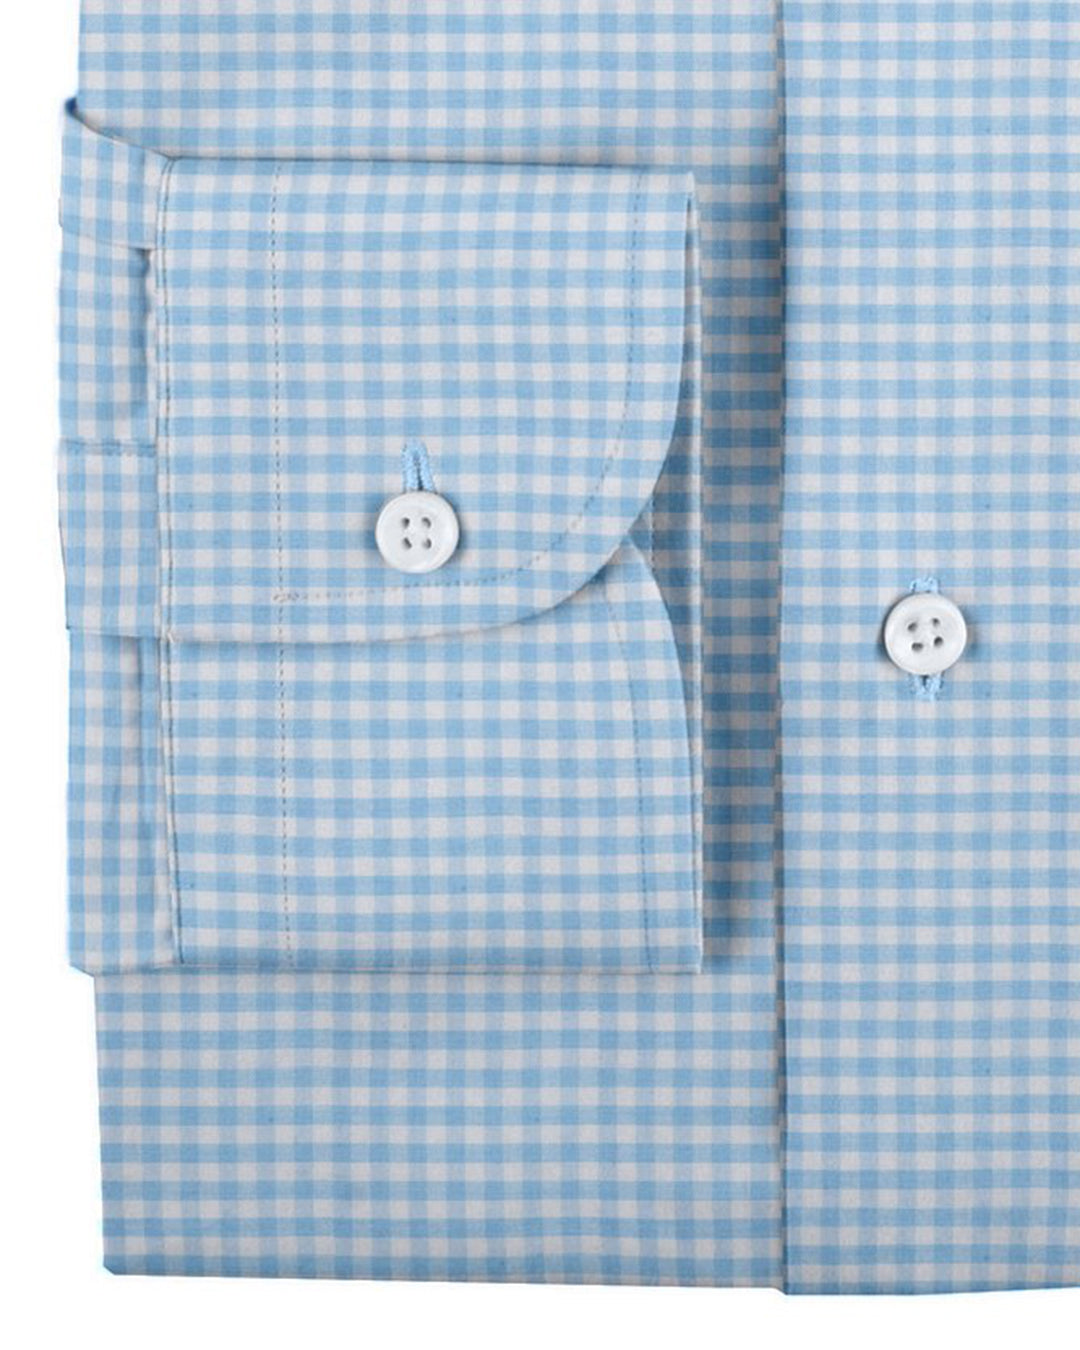 Close cuff view of custom check shirts for men by Luxire light blue gingham